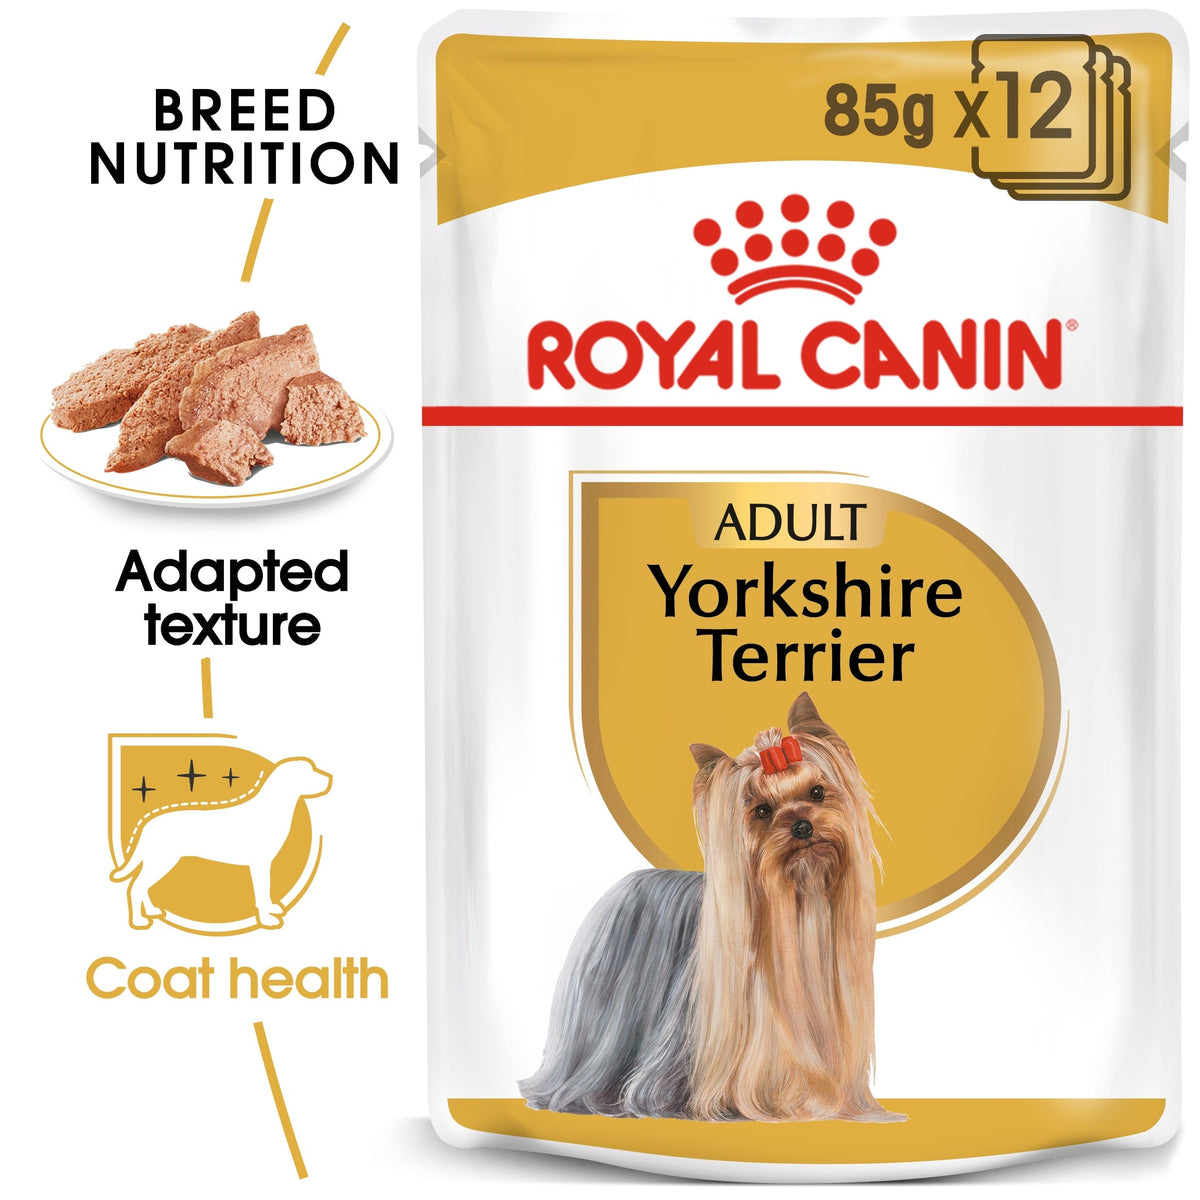 BREED HEALTH NUTRITION YORKSHIRE ADULT (WET FOOD - POUCHES) (4598351462453)